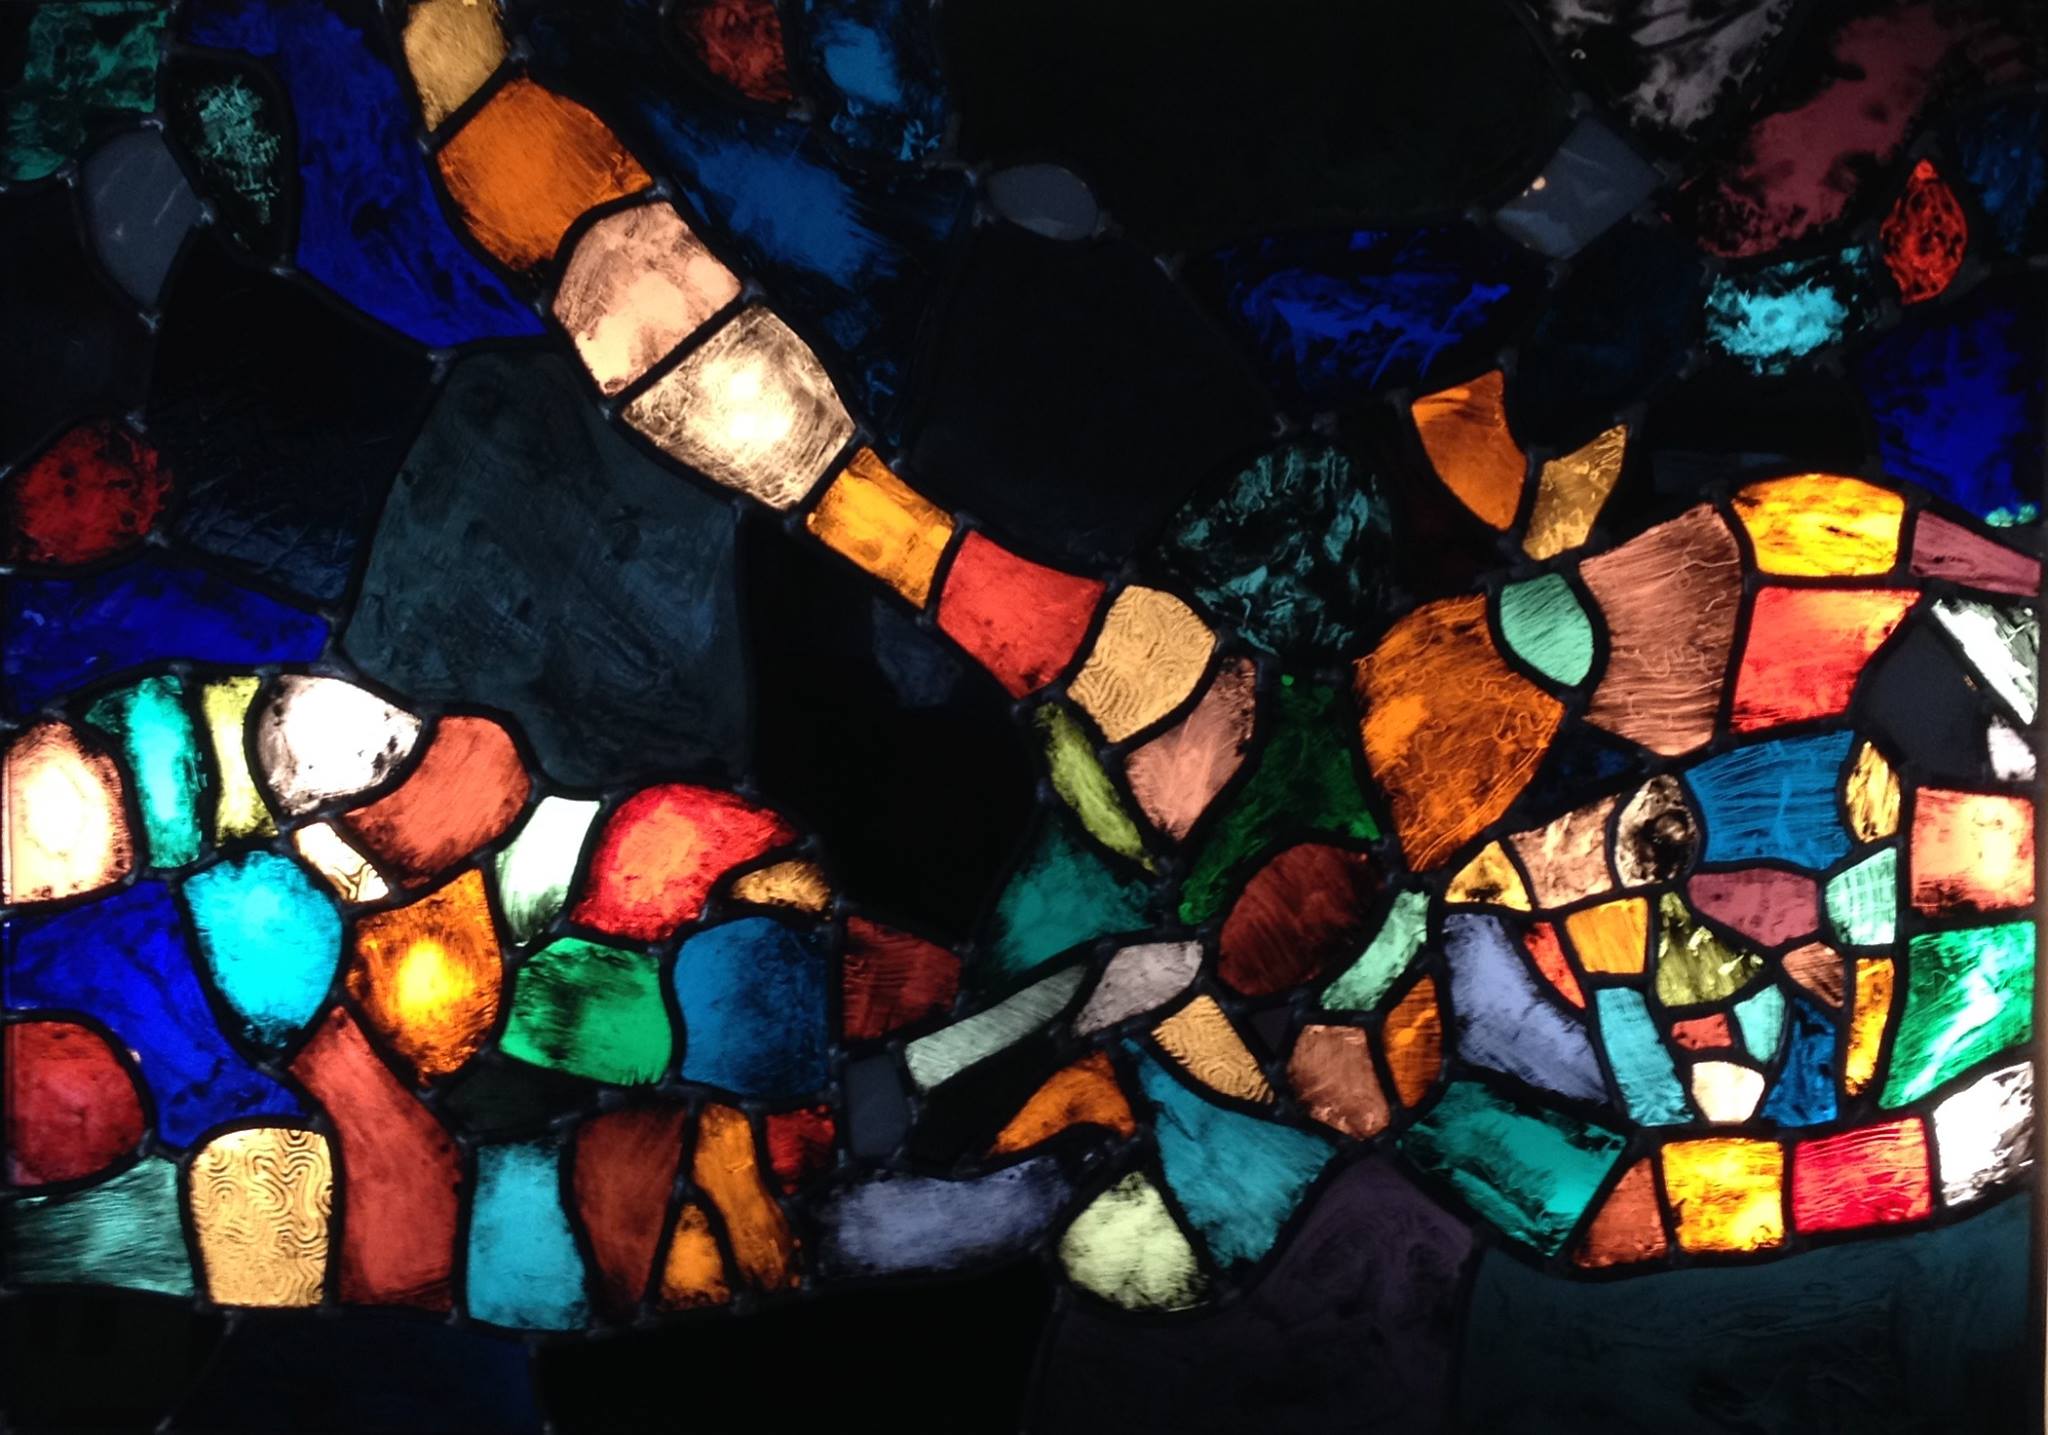 Stained glass exhibition